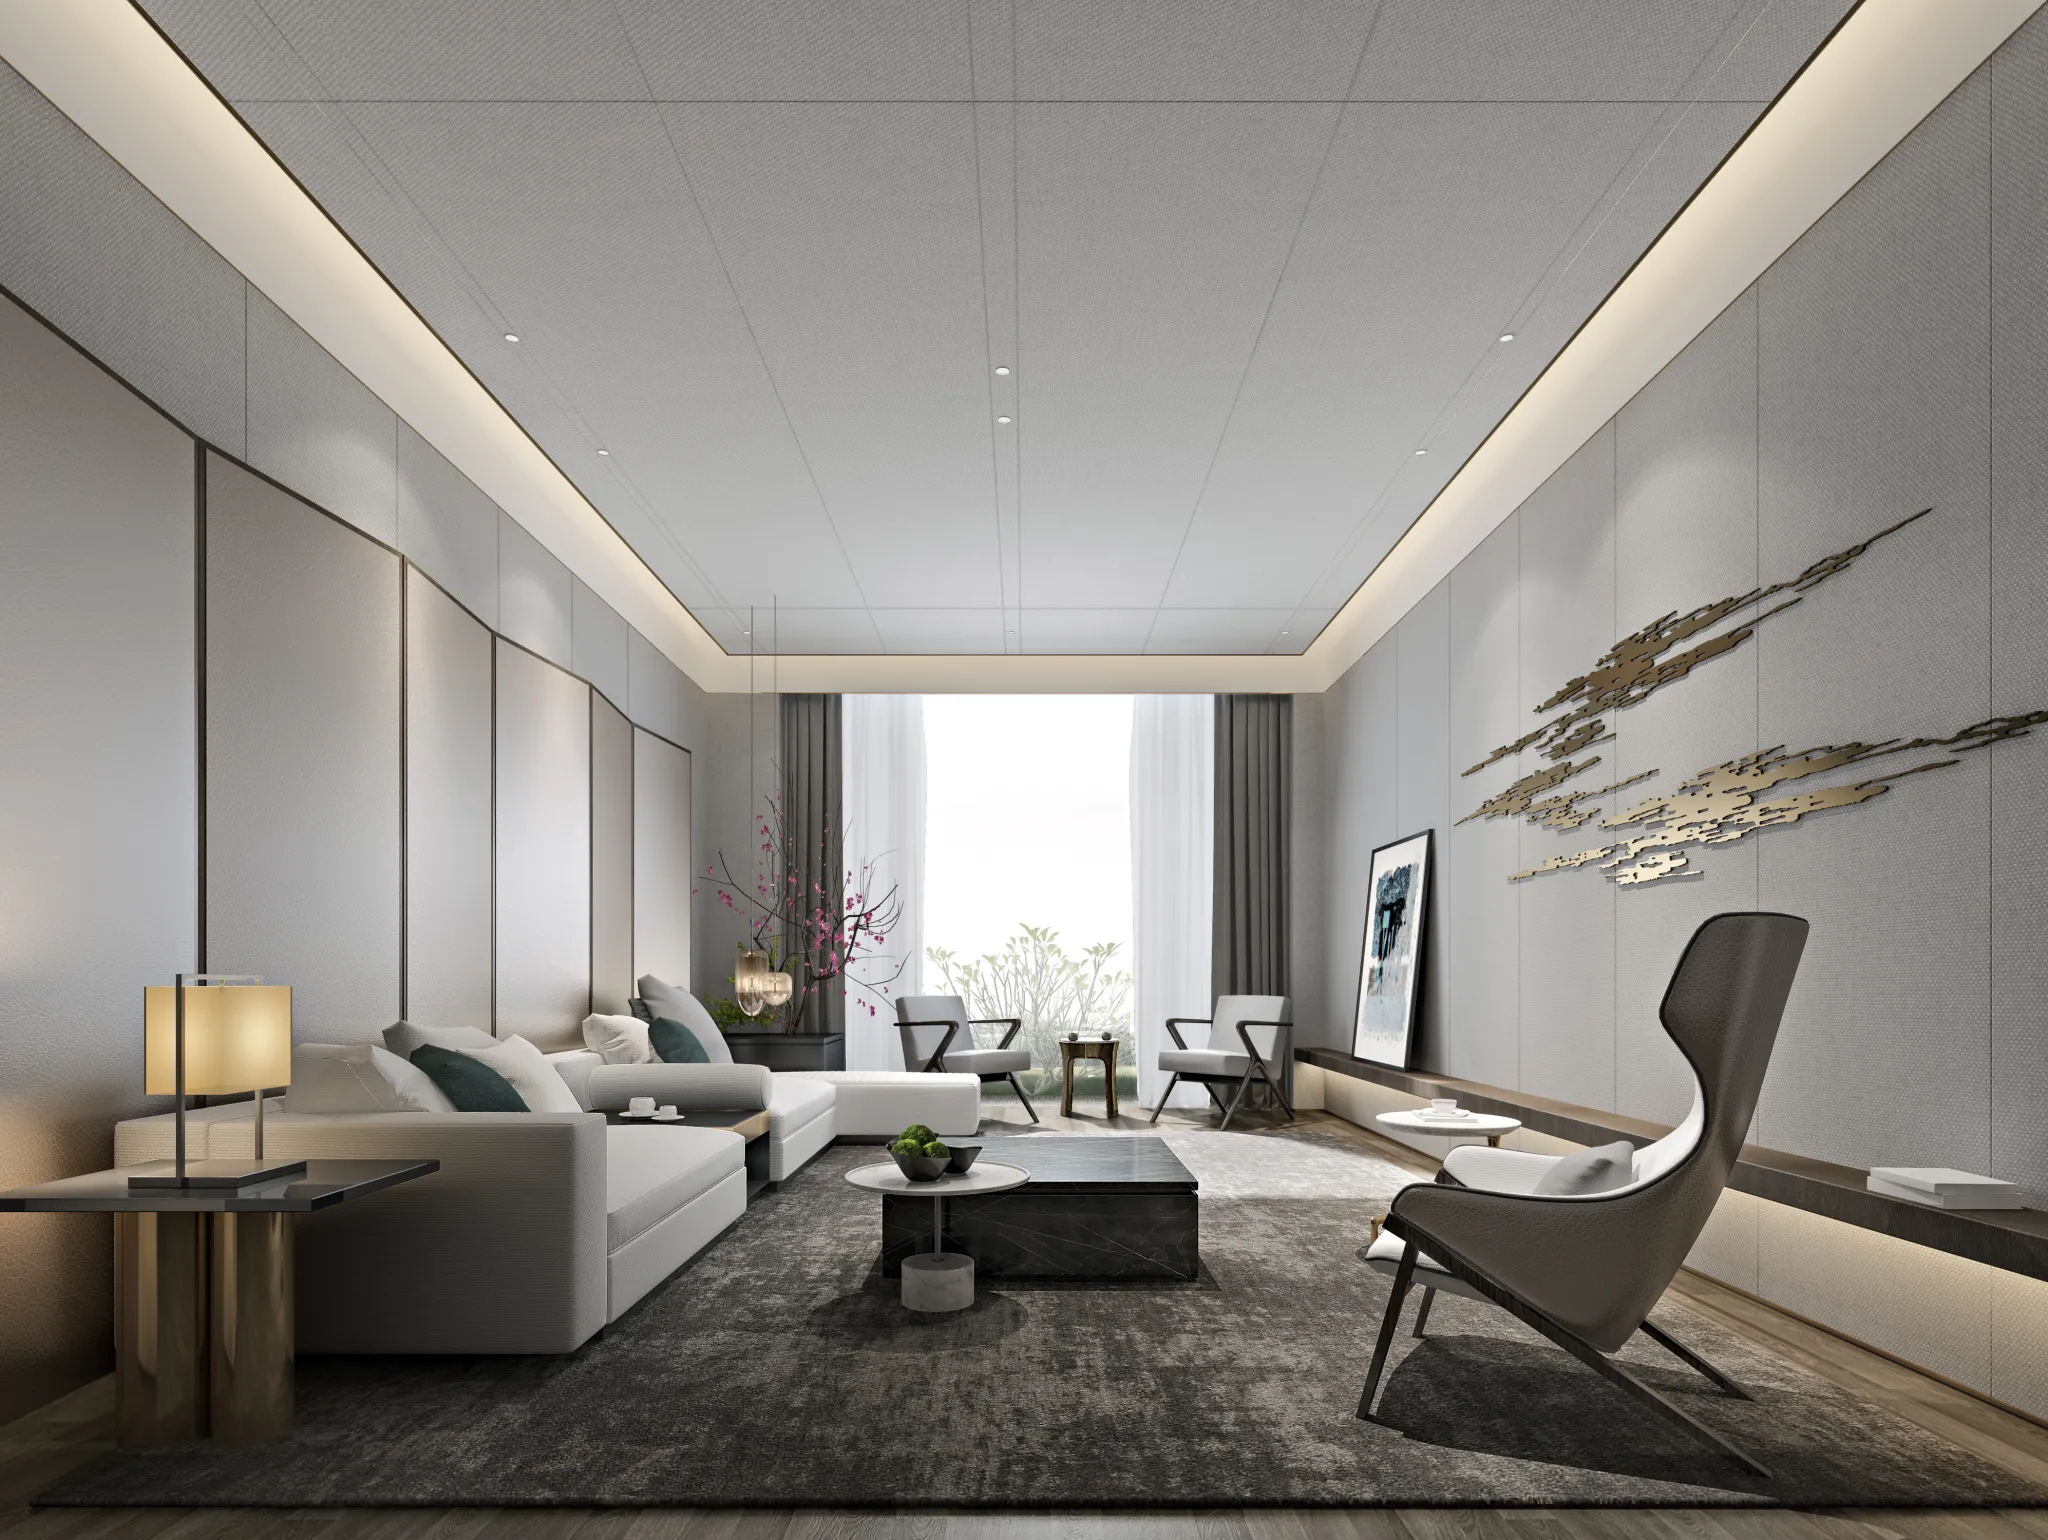 DESMOD INTERIOR 2021 (VRAY) – 4. LIVING ROOM – CHINESE – 119